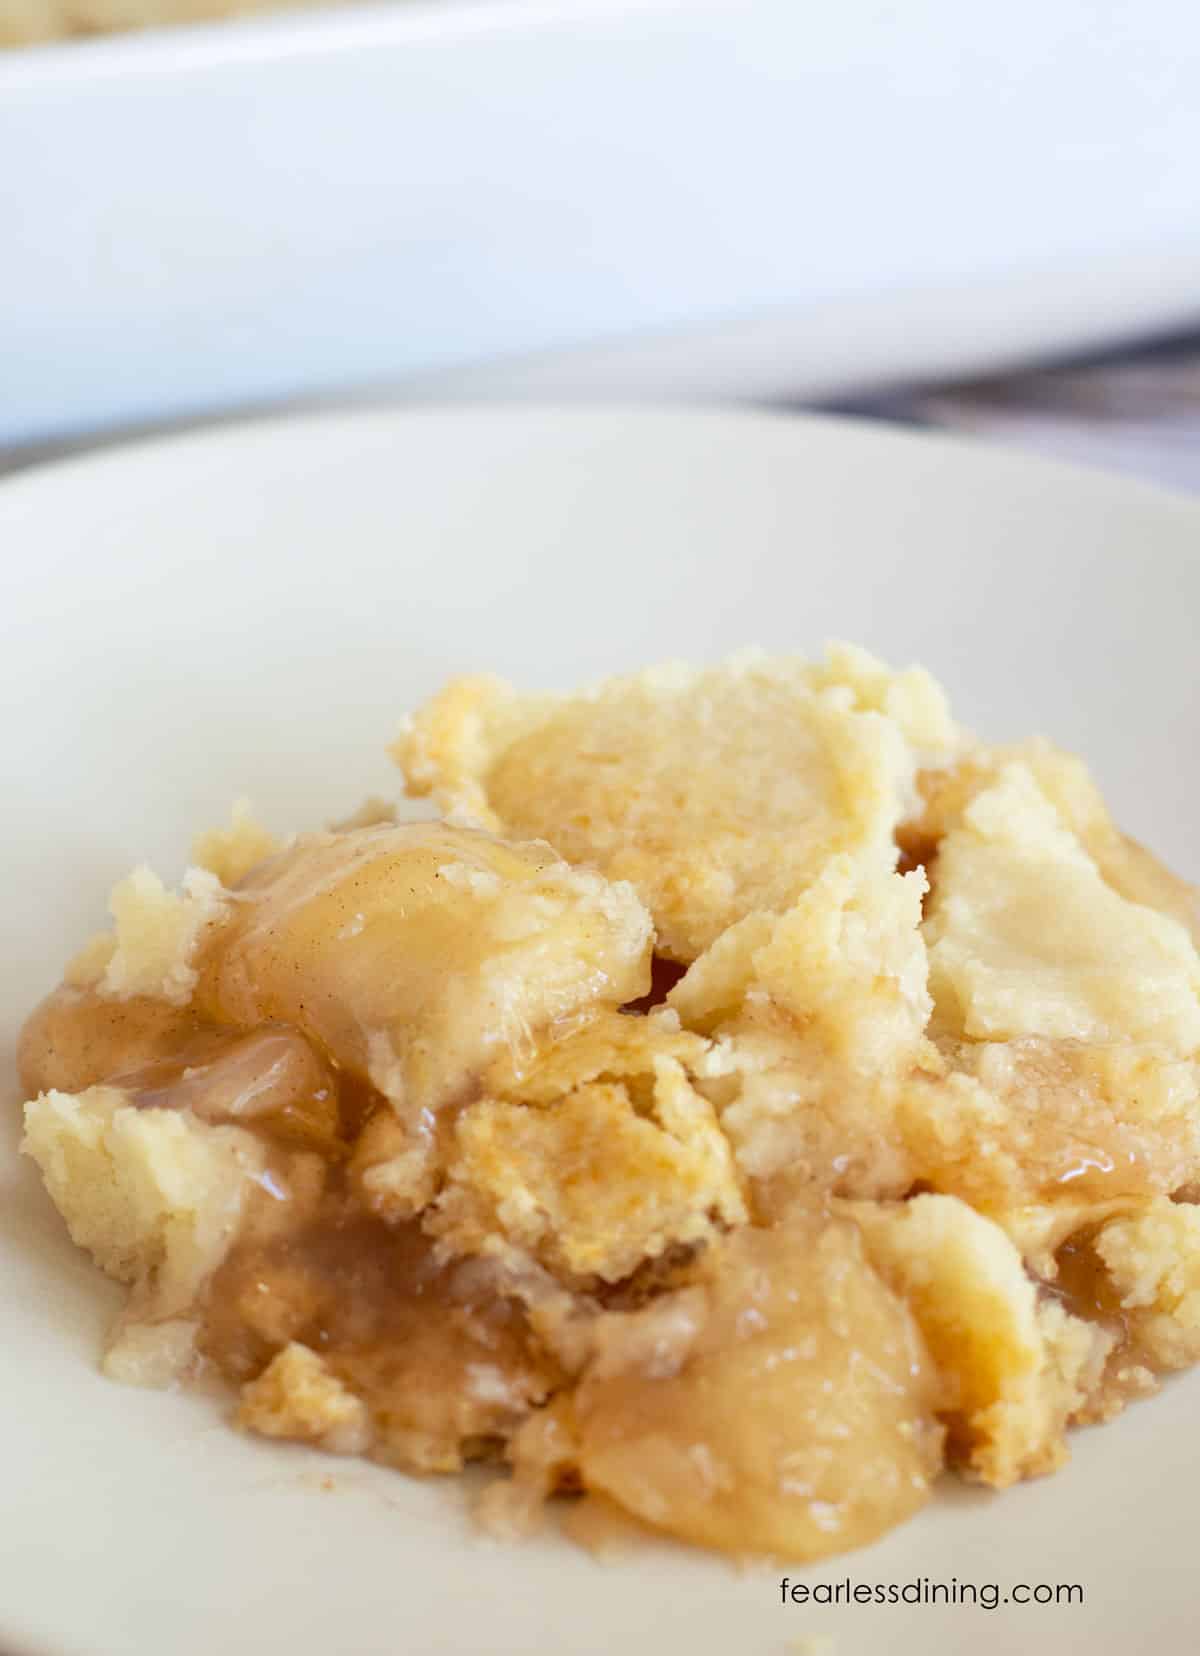 A picture of a serving of apple dump cake on a plate.